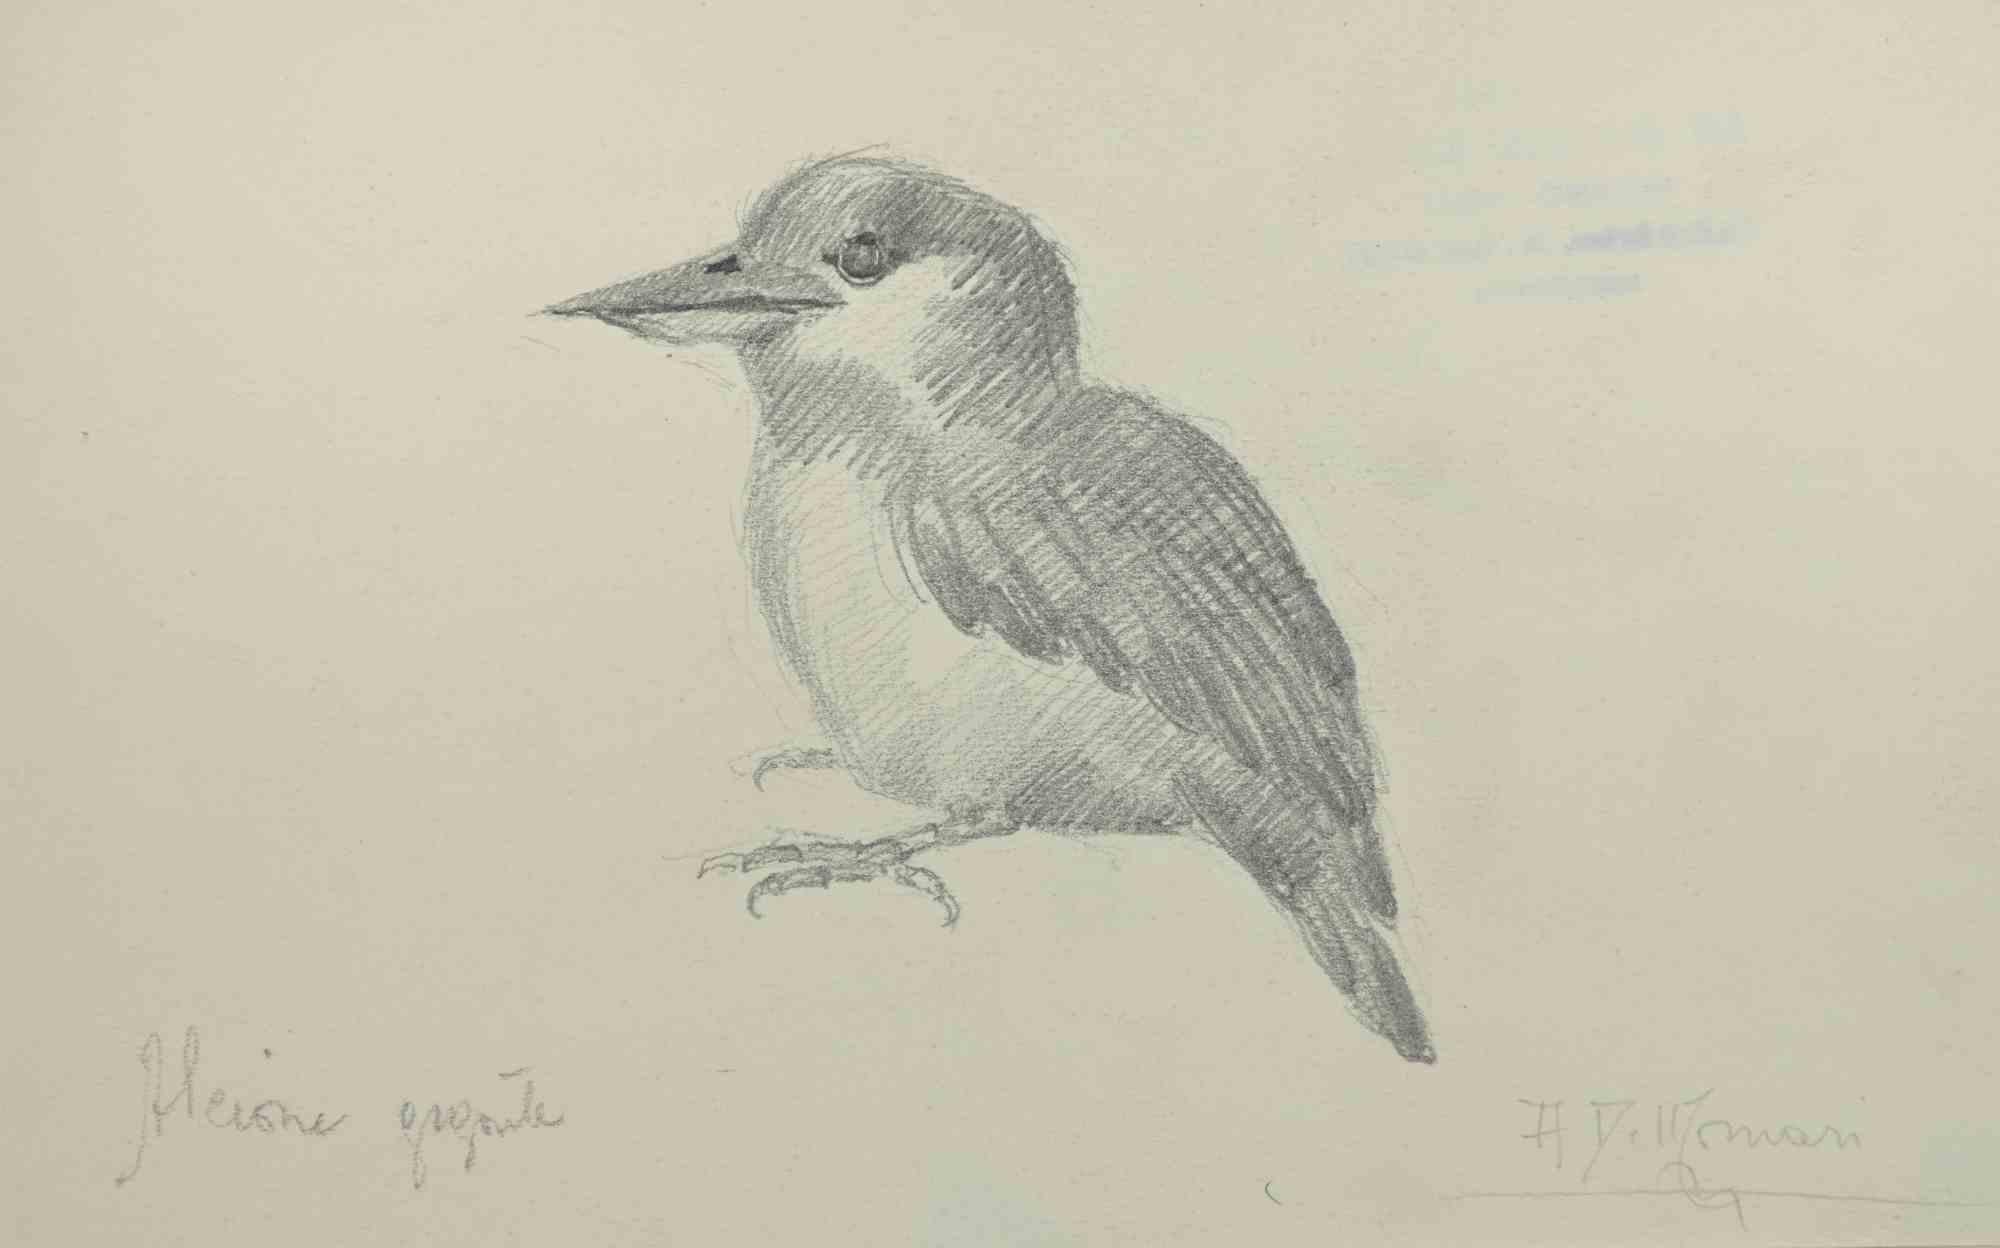 The Bird is a Drawing in pencil realized by  Augusto Monari in the Early-20th Century.

Hand-signed on the lower.

Good conditions, including a creamy-colored Passepartout.

The artwork is depicted through confident strokes in a well-balanced